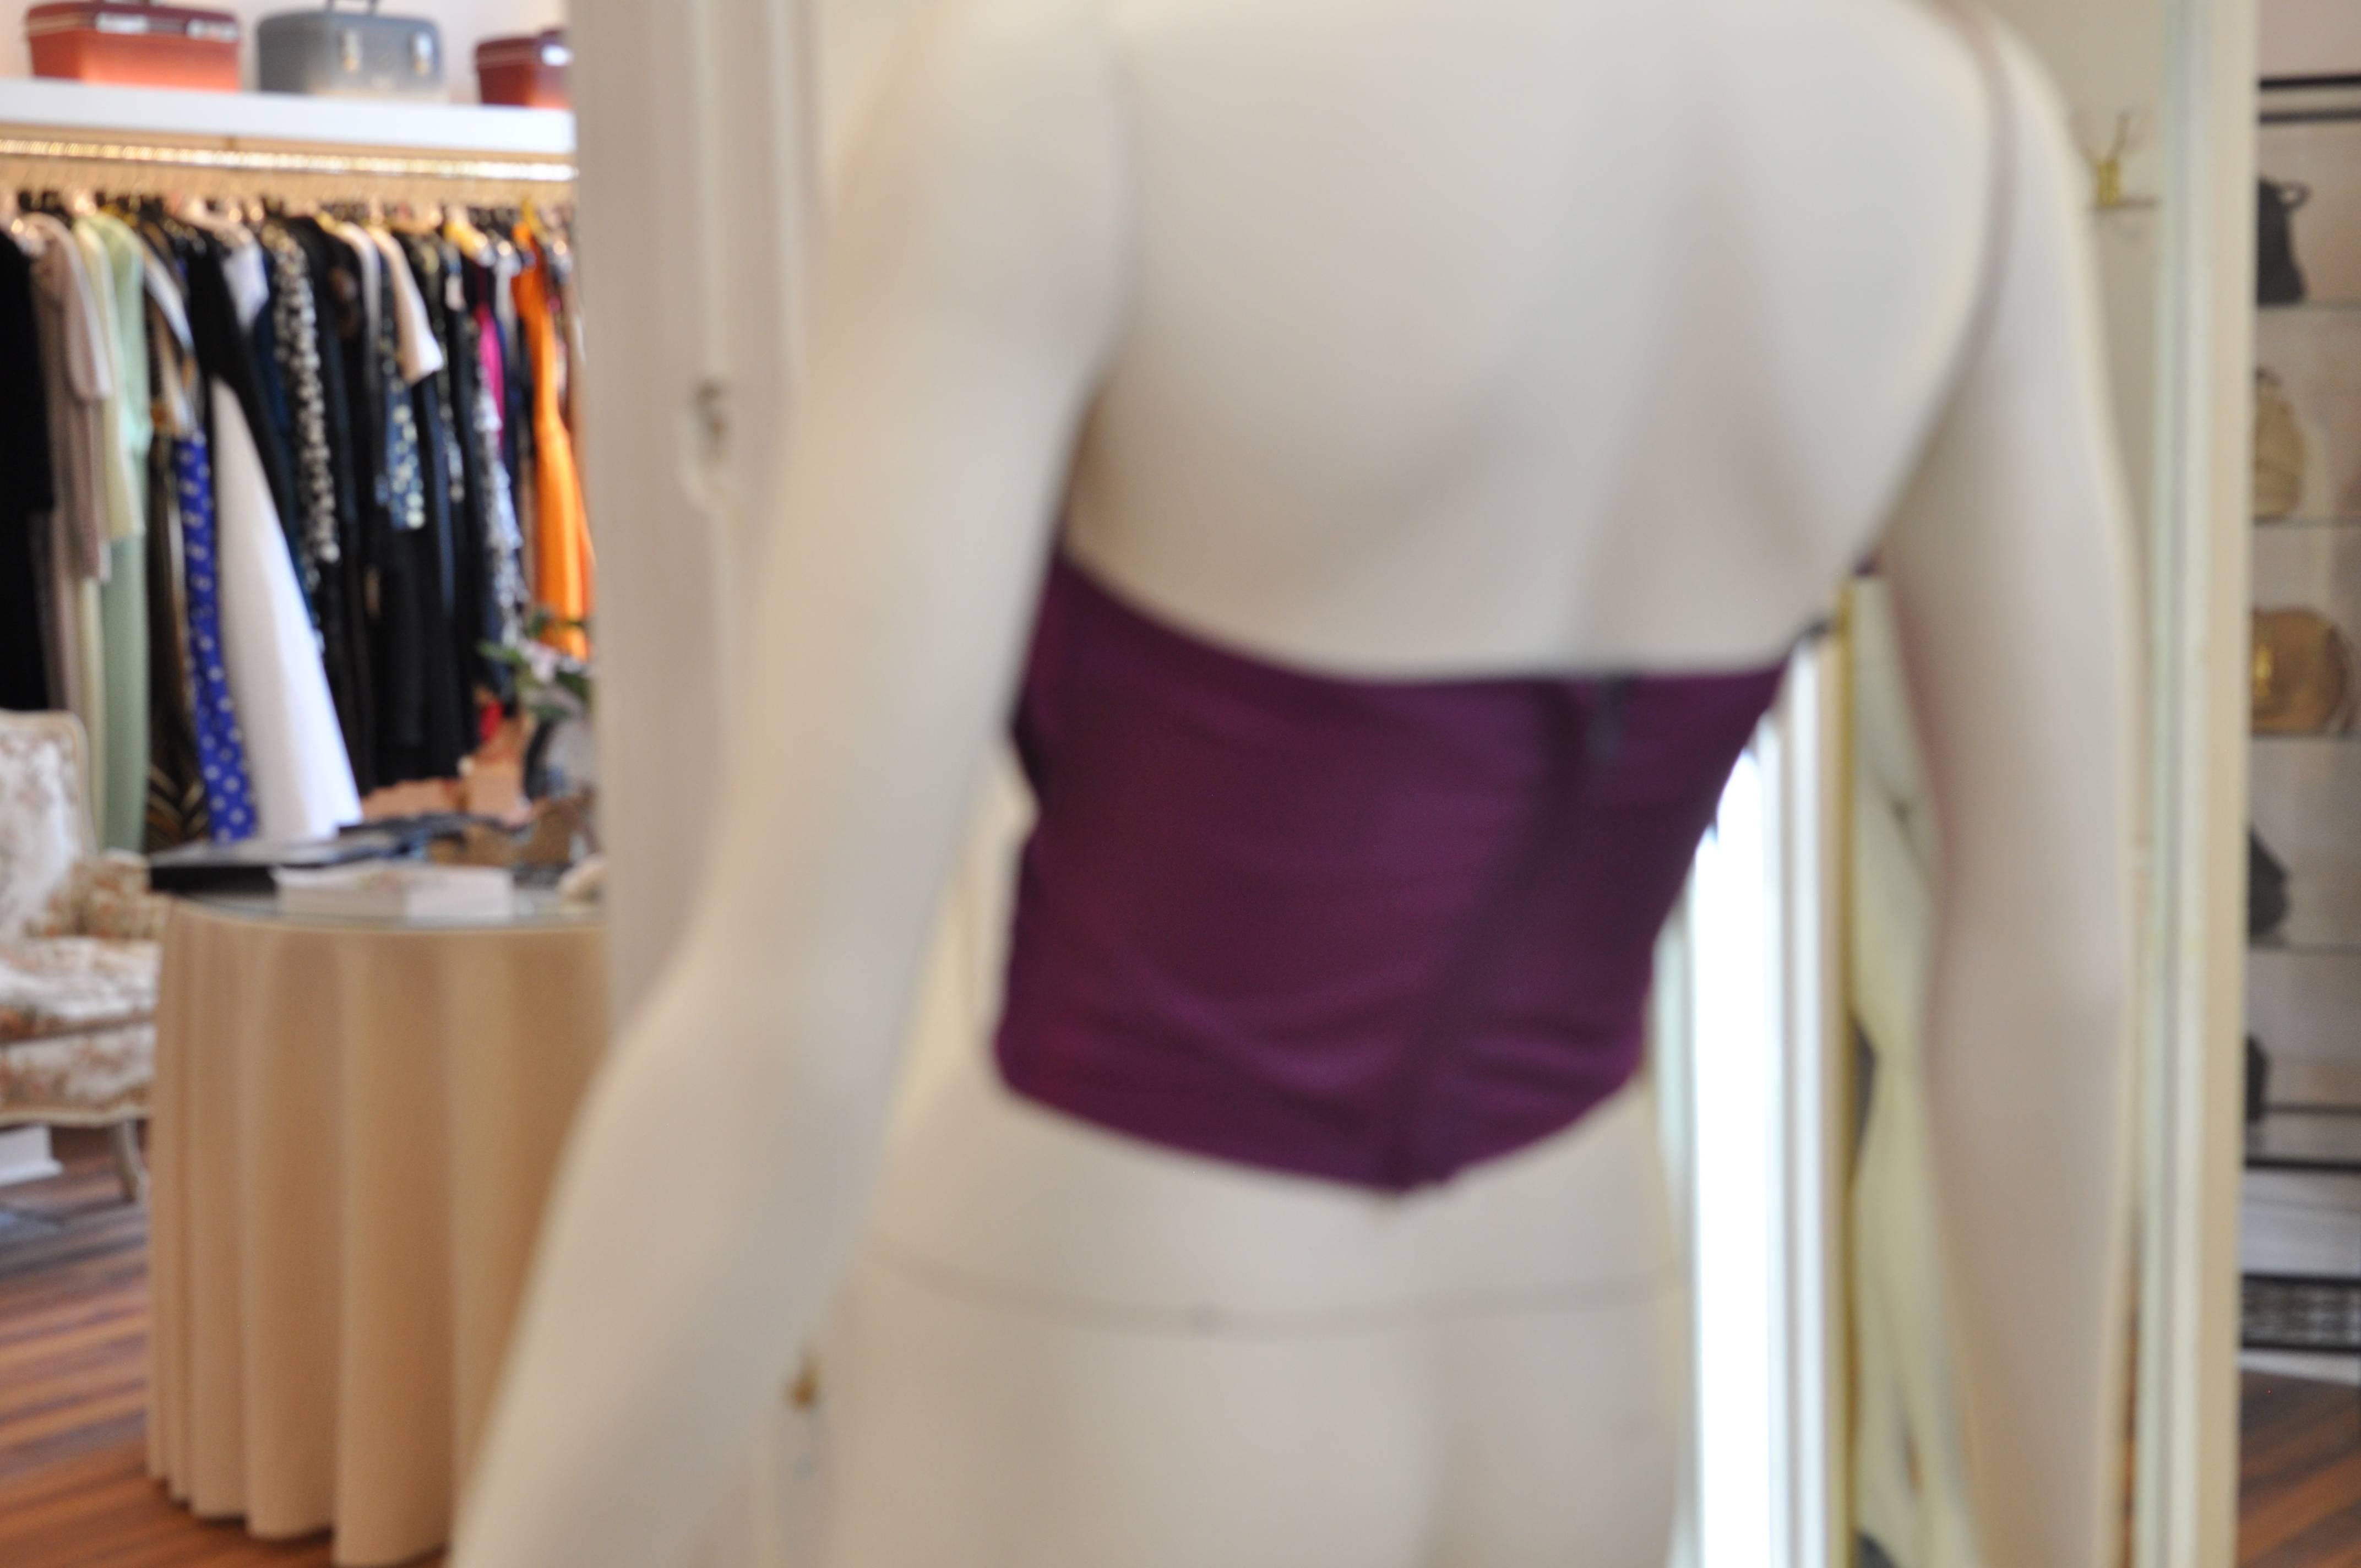 This is an opportunity to own a vintage Zandra Rhodes at a good price! The acetate bustier is a lovely burgundy with a deep purple polyester lining, and is both pleated and ruffled.

there is discoloration through the front, but much of it blends in.